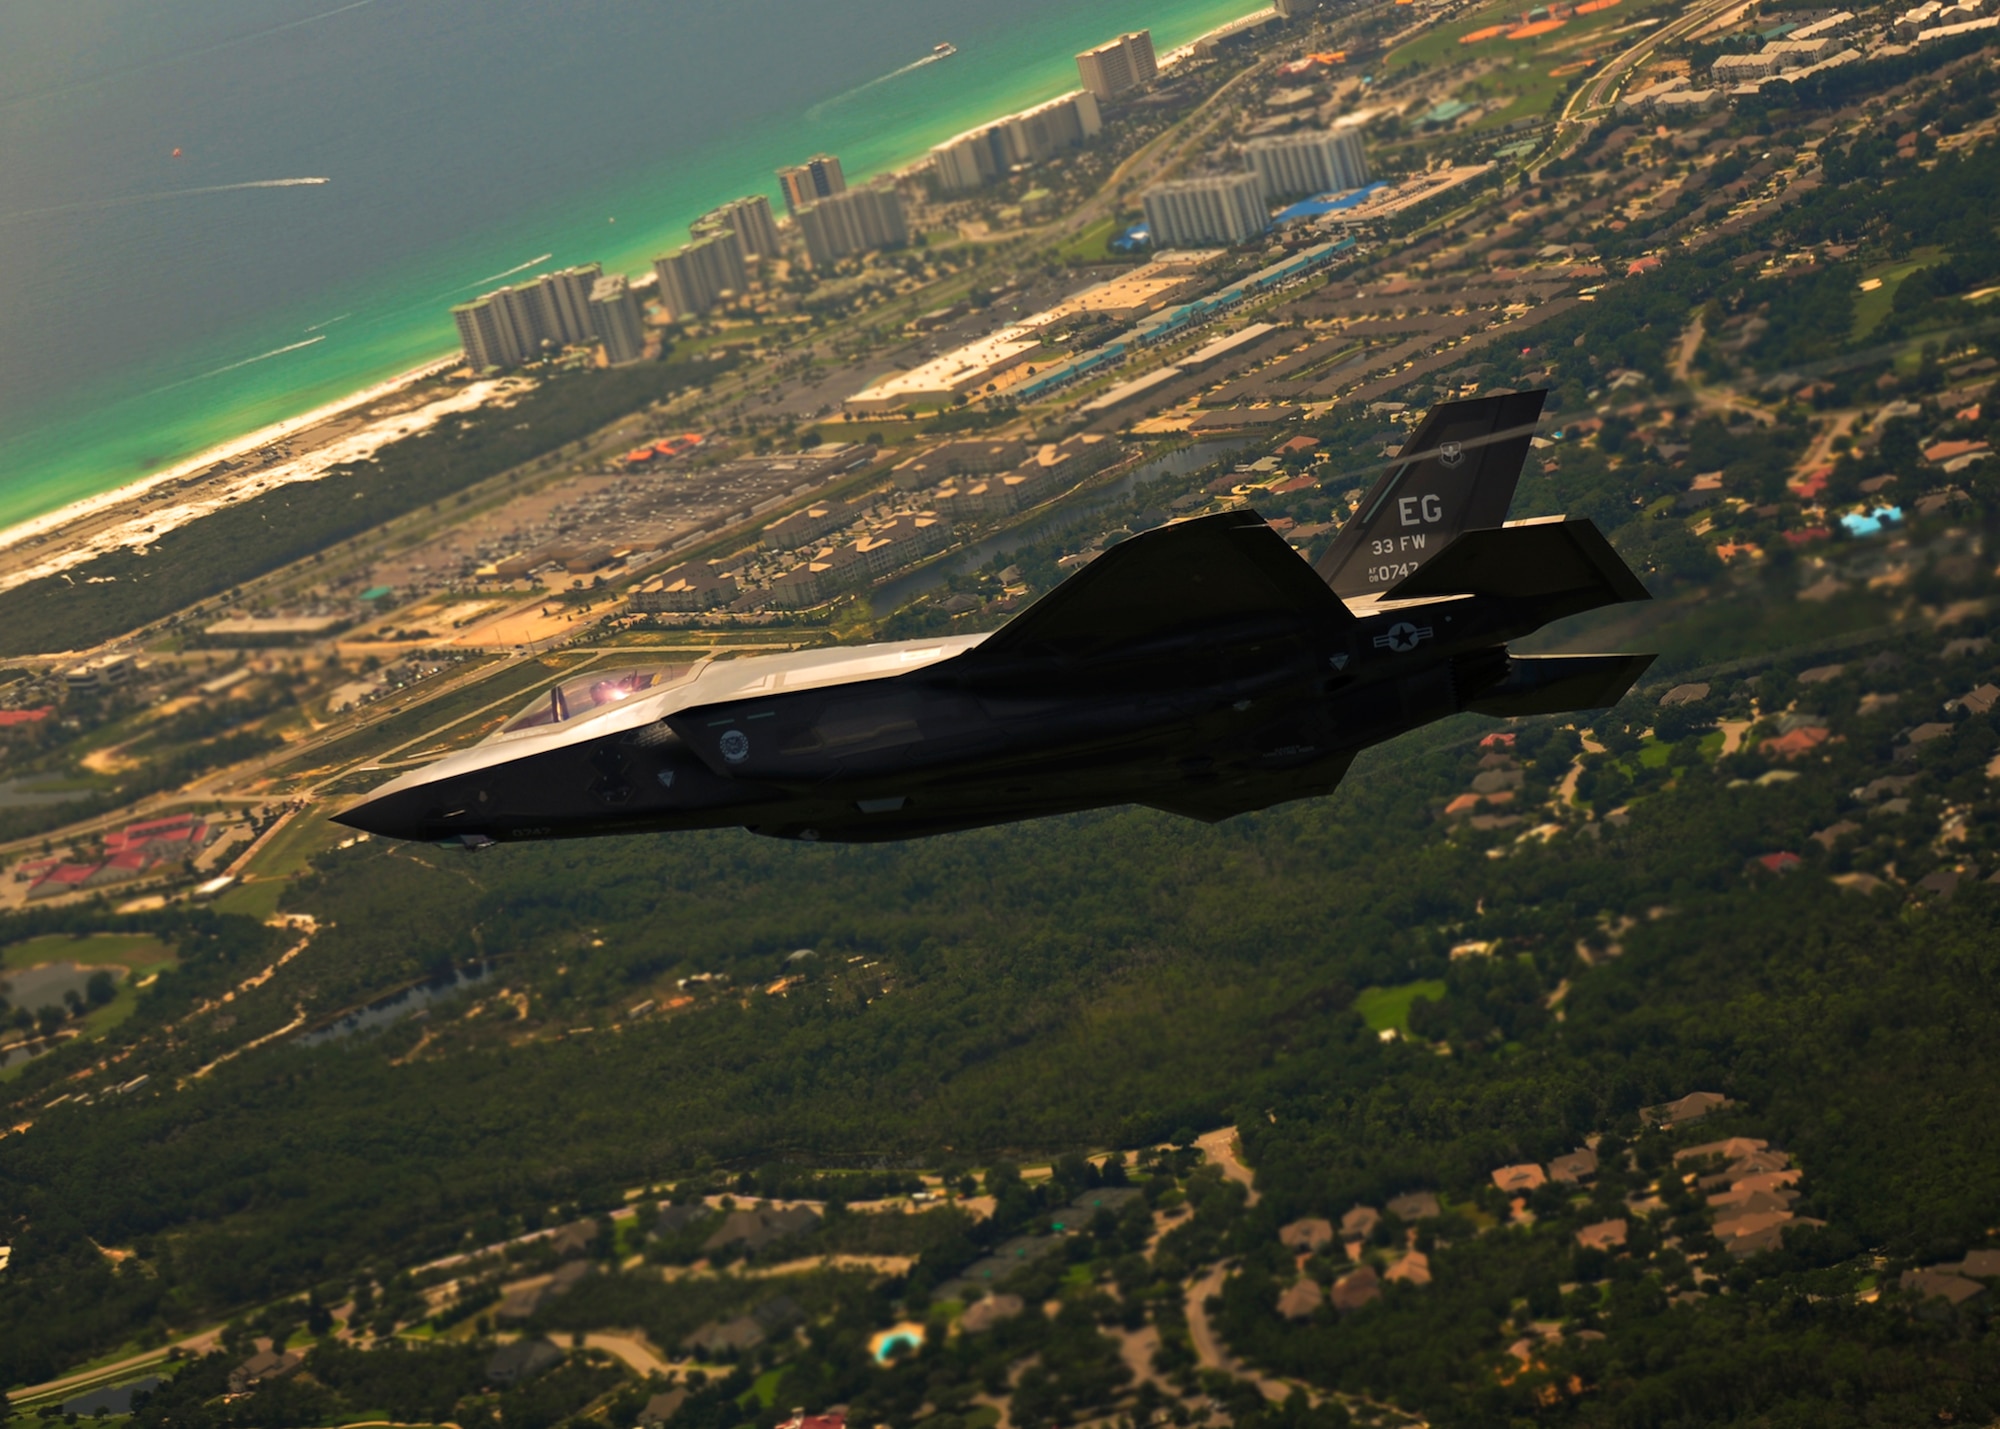 DOD’s first F-35 Lightning II joint strike fighter soars over the Northwest Florida airspace before landing at its new home at Eglin Air Force Base, July 14.  Its pilot, Lt. Col. Eric Smith, of the 58th Fighter Squadron, is the first Air Force qualified JSF pilot.  (U.S. Air Force photo/Staff Sgt. Joely Santiago)